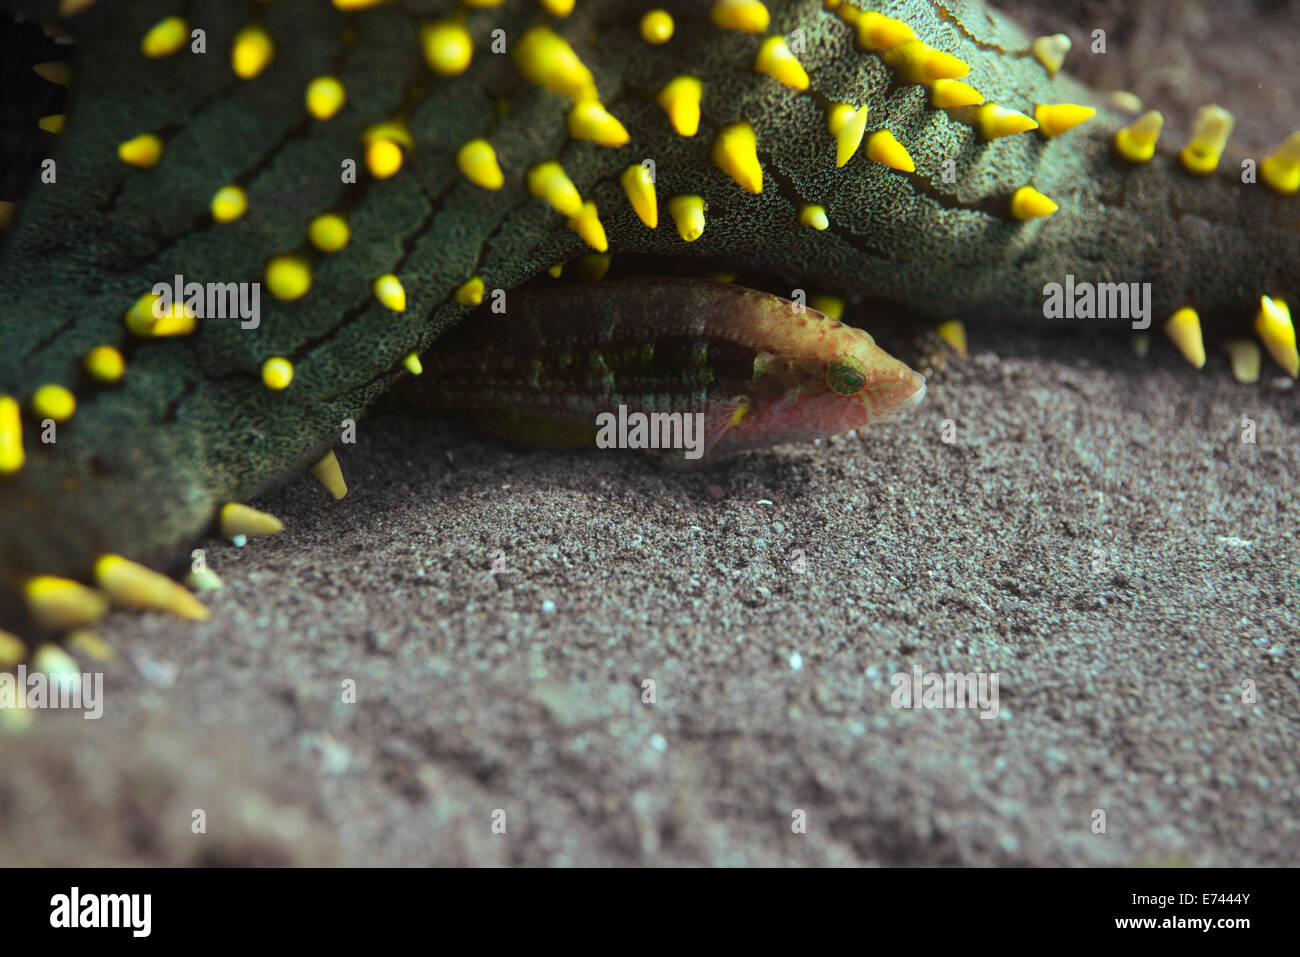 Knobbed starfish on the ocean floor with a wrasse peeking out from under it Stock Photo